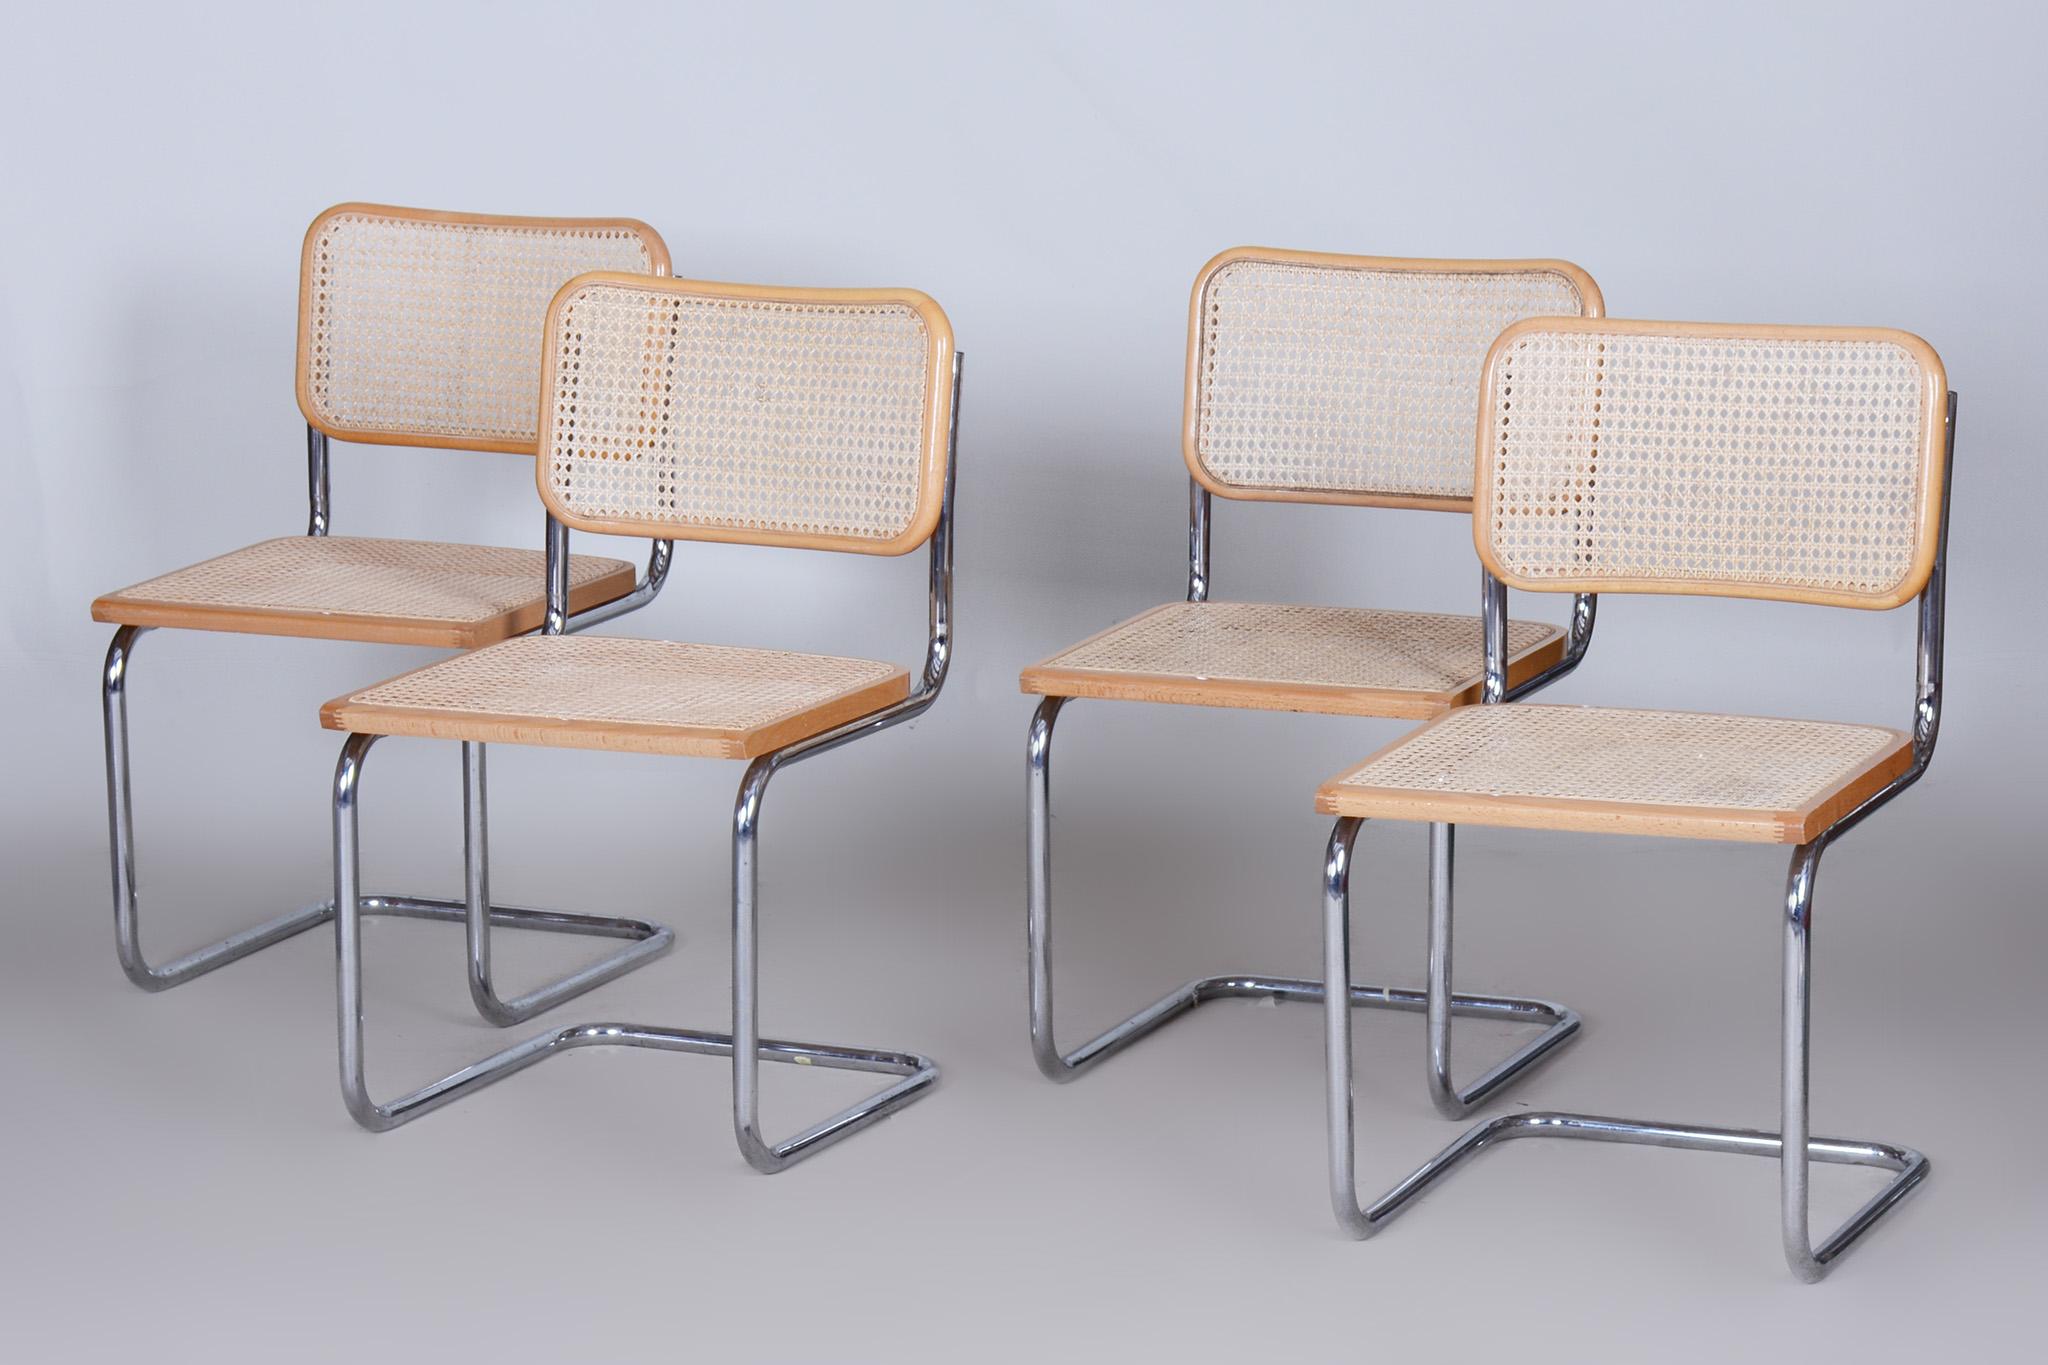 Set of Four Bauhaus Chairs, Chrome-Plated Steel, Rattan, Beech, Italy, 1960s For Sale 1